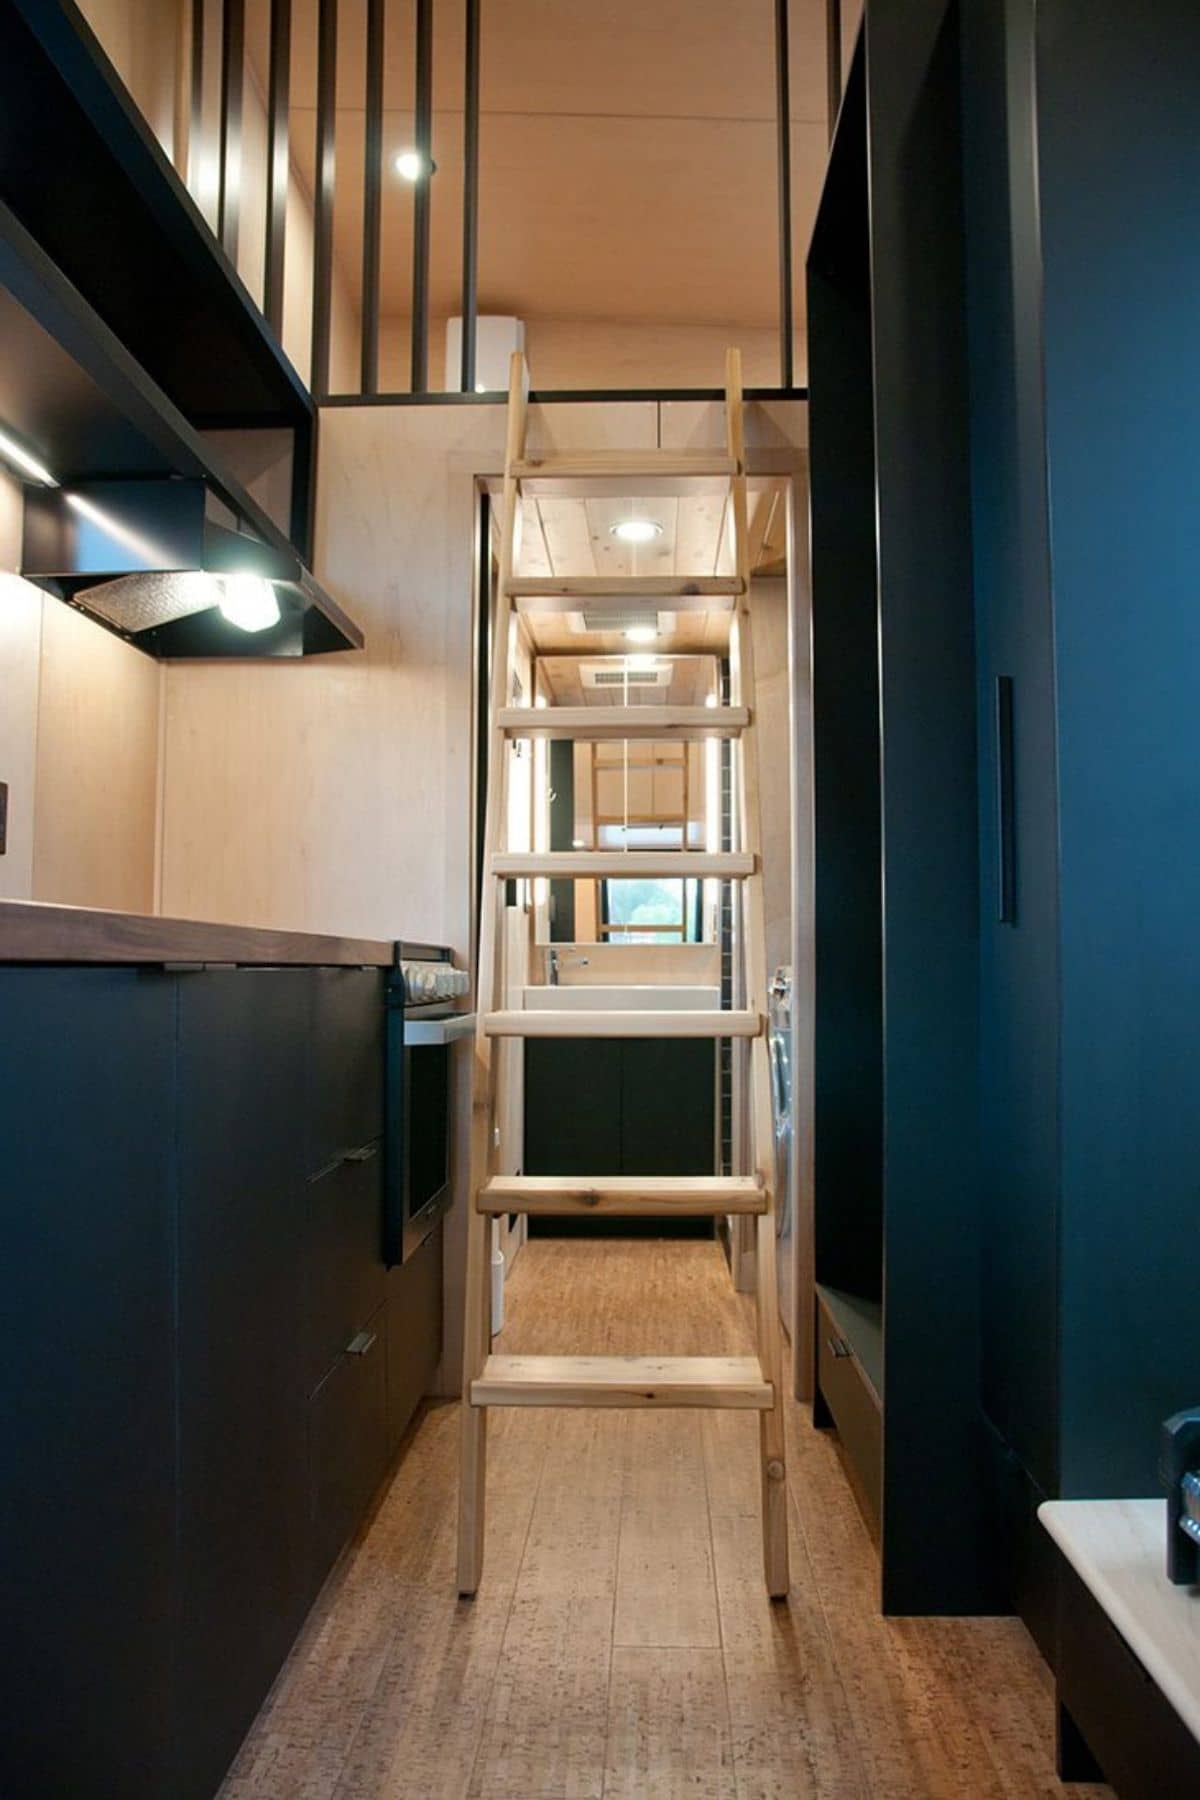 Ladder to loft in the middle of the kitchen